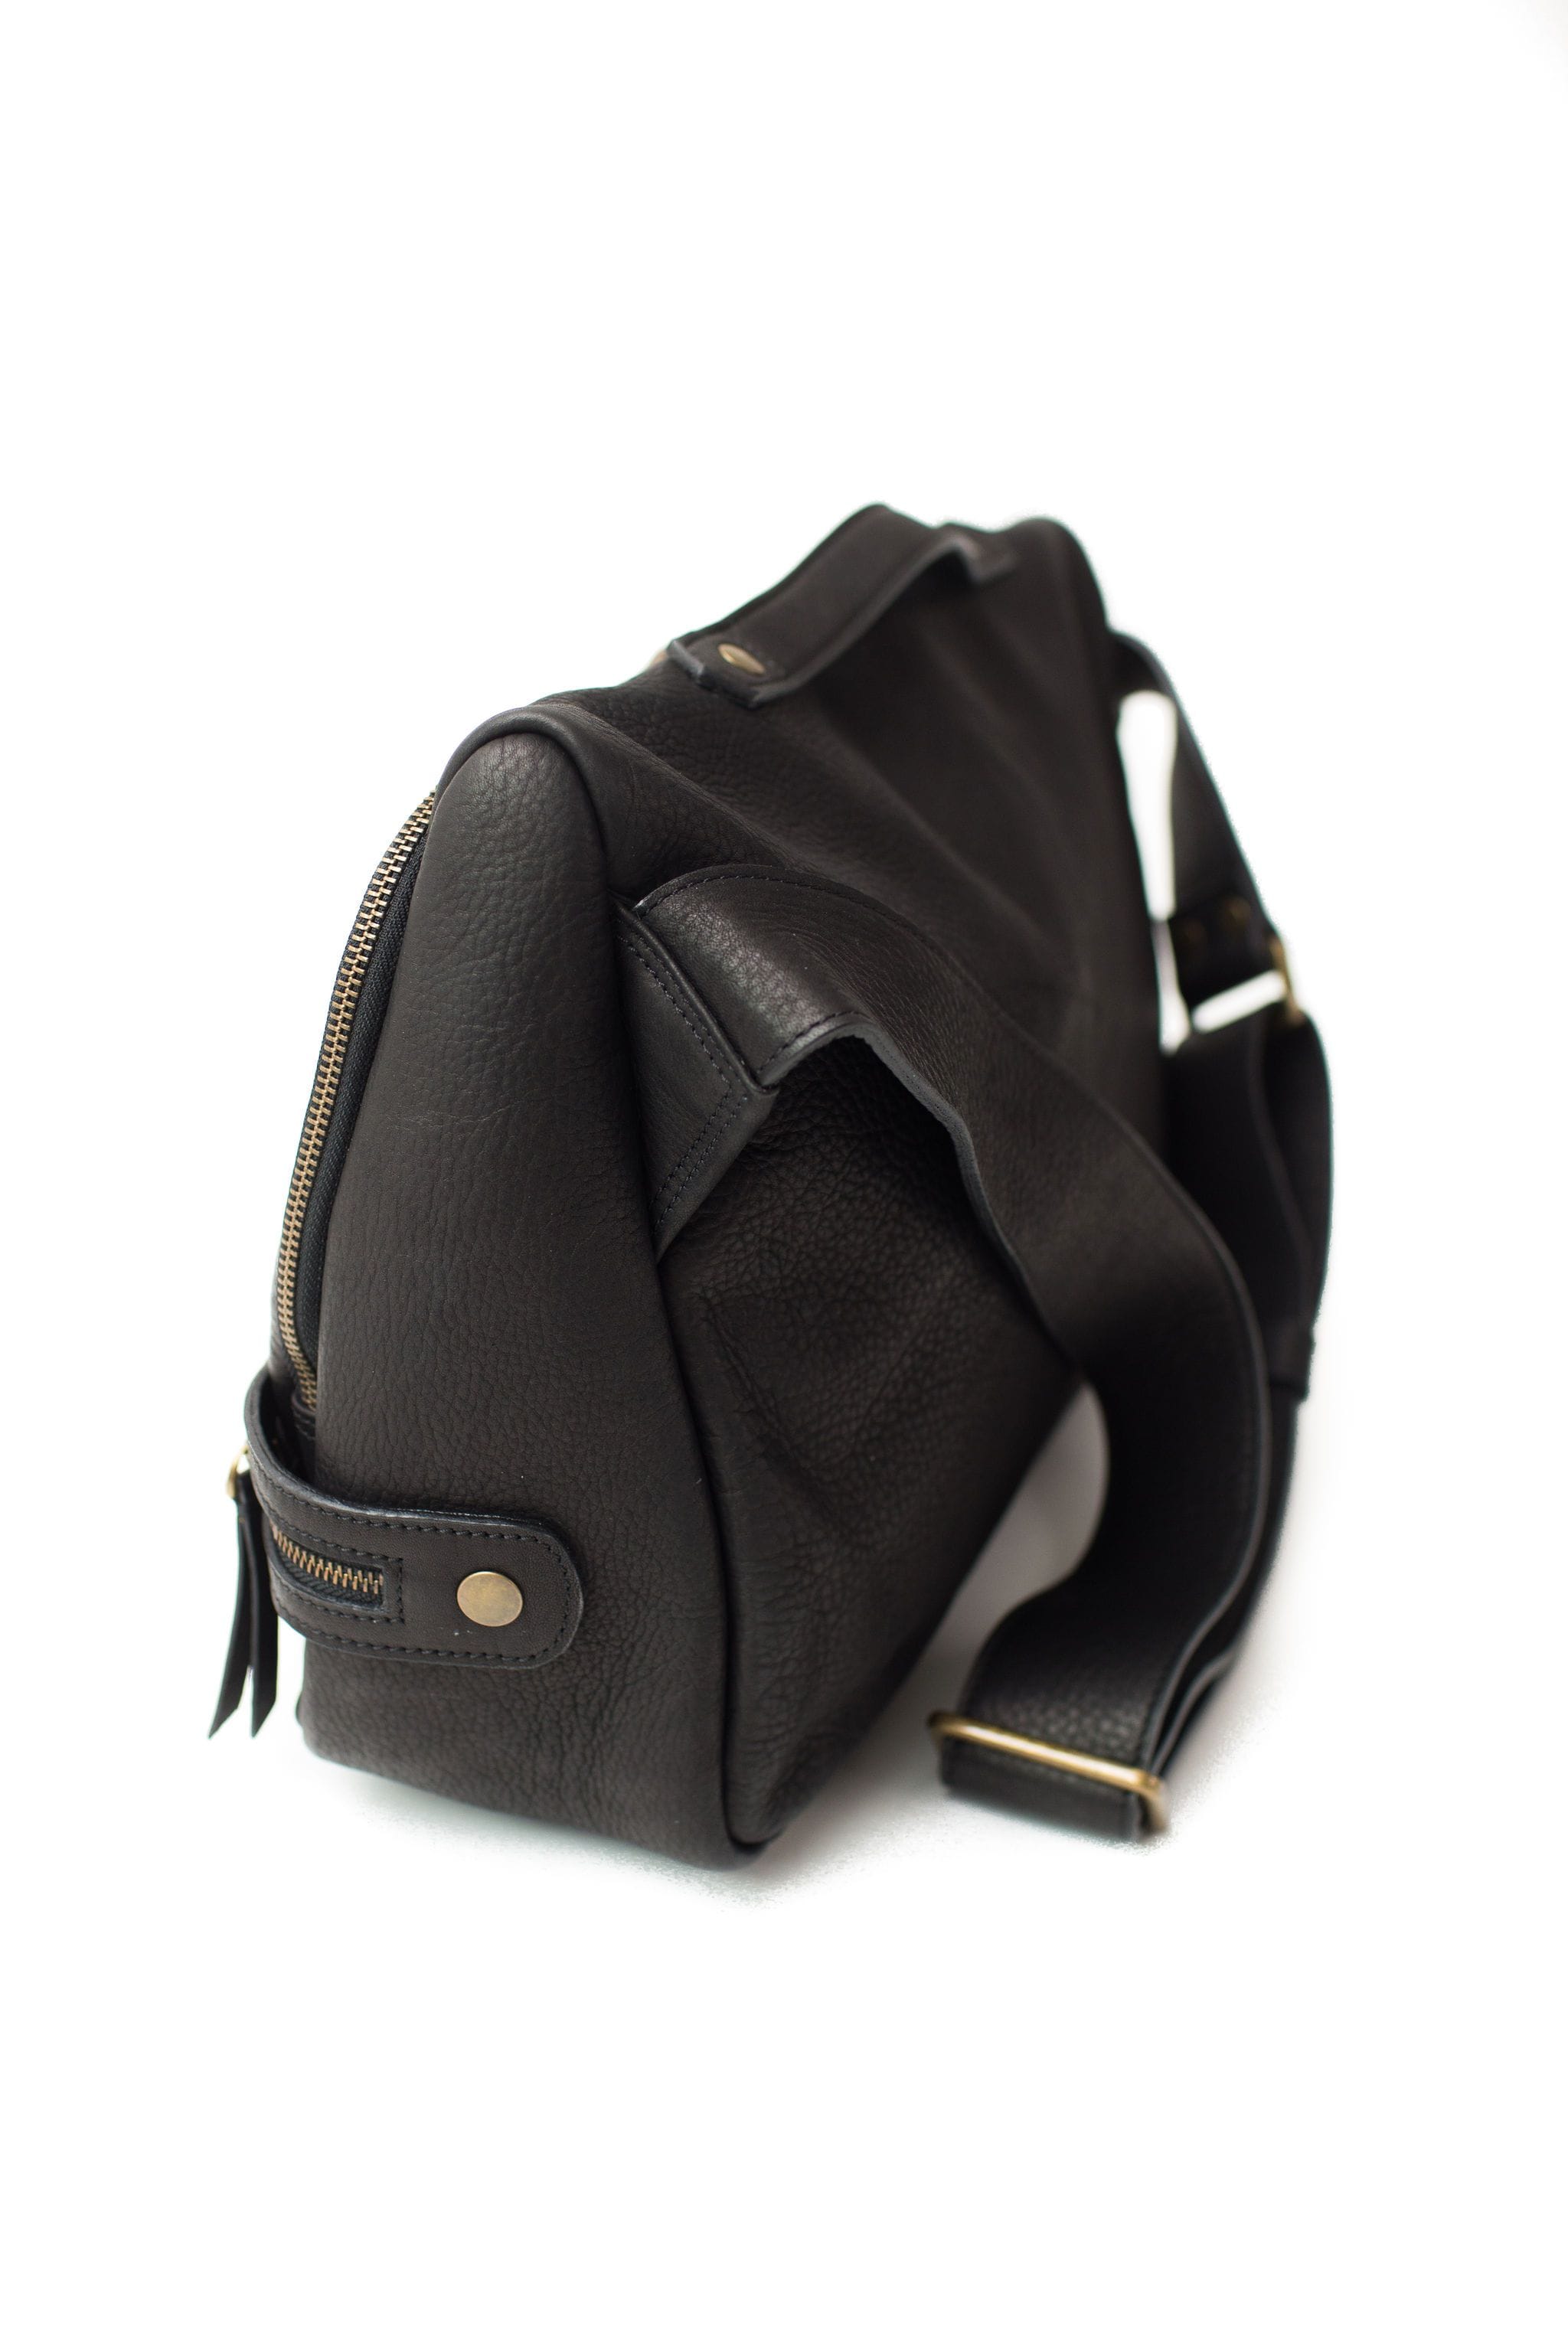 The Rapinoe unisex messenger bag in black raw leather has an adjustable strap and top handle.